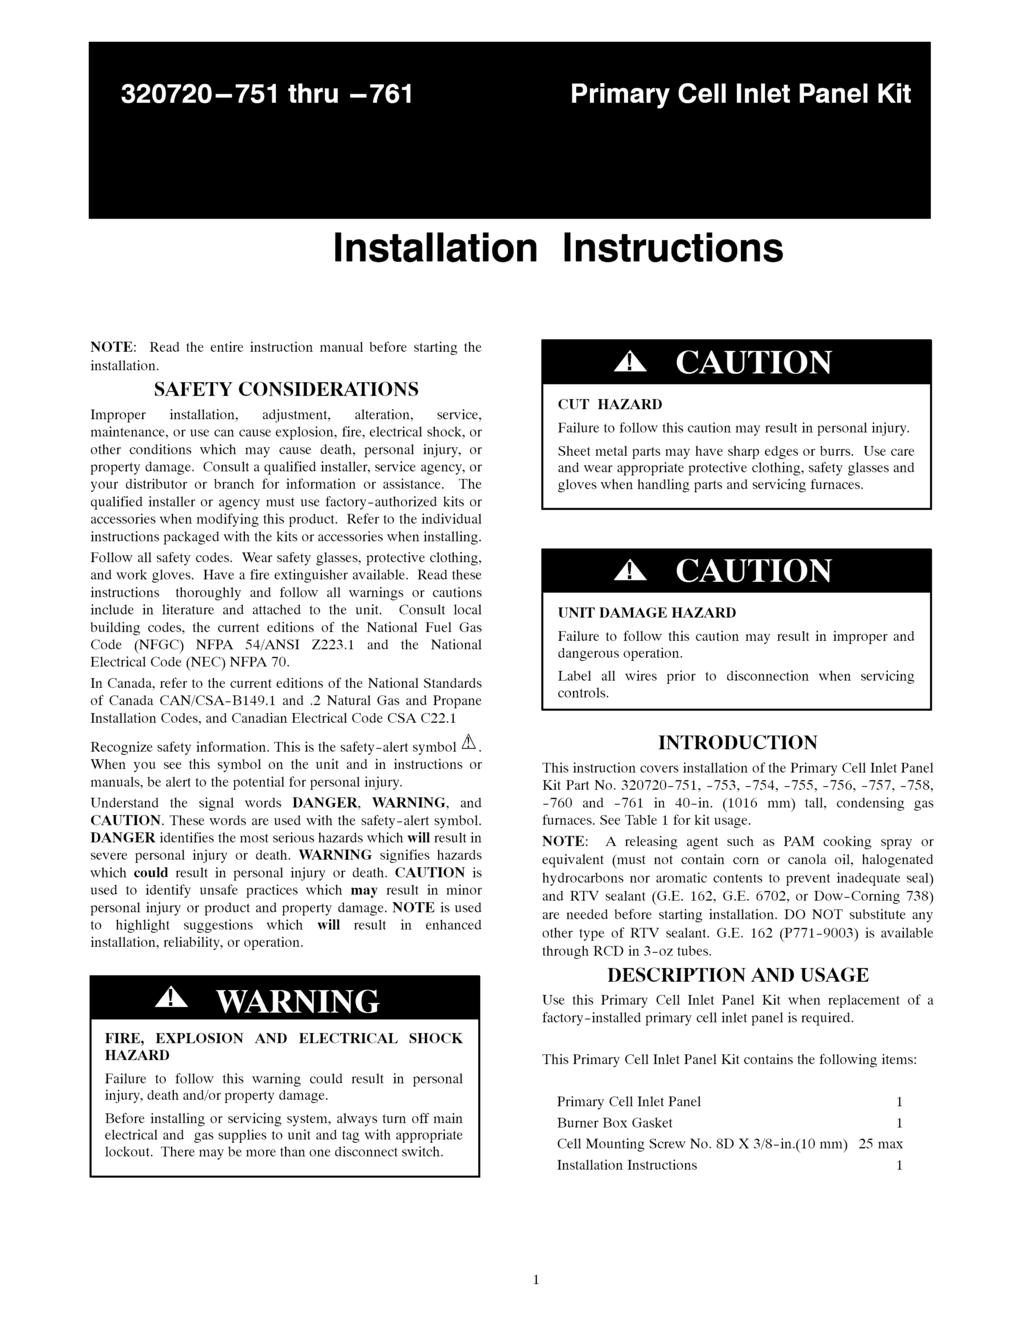 Installation Instructions NOTE: Read the entire instruction manual before starting the installation.